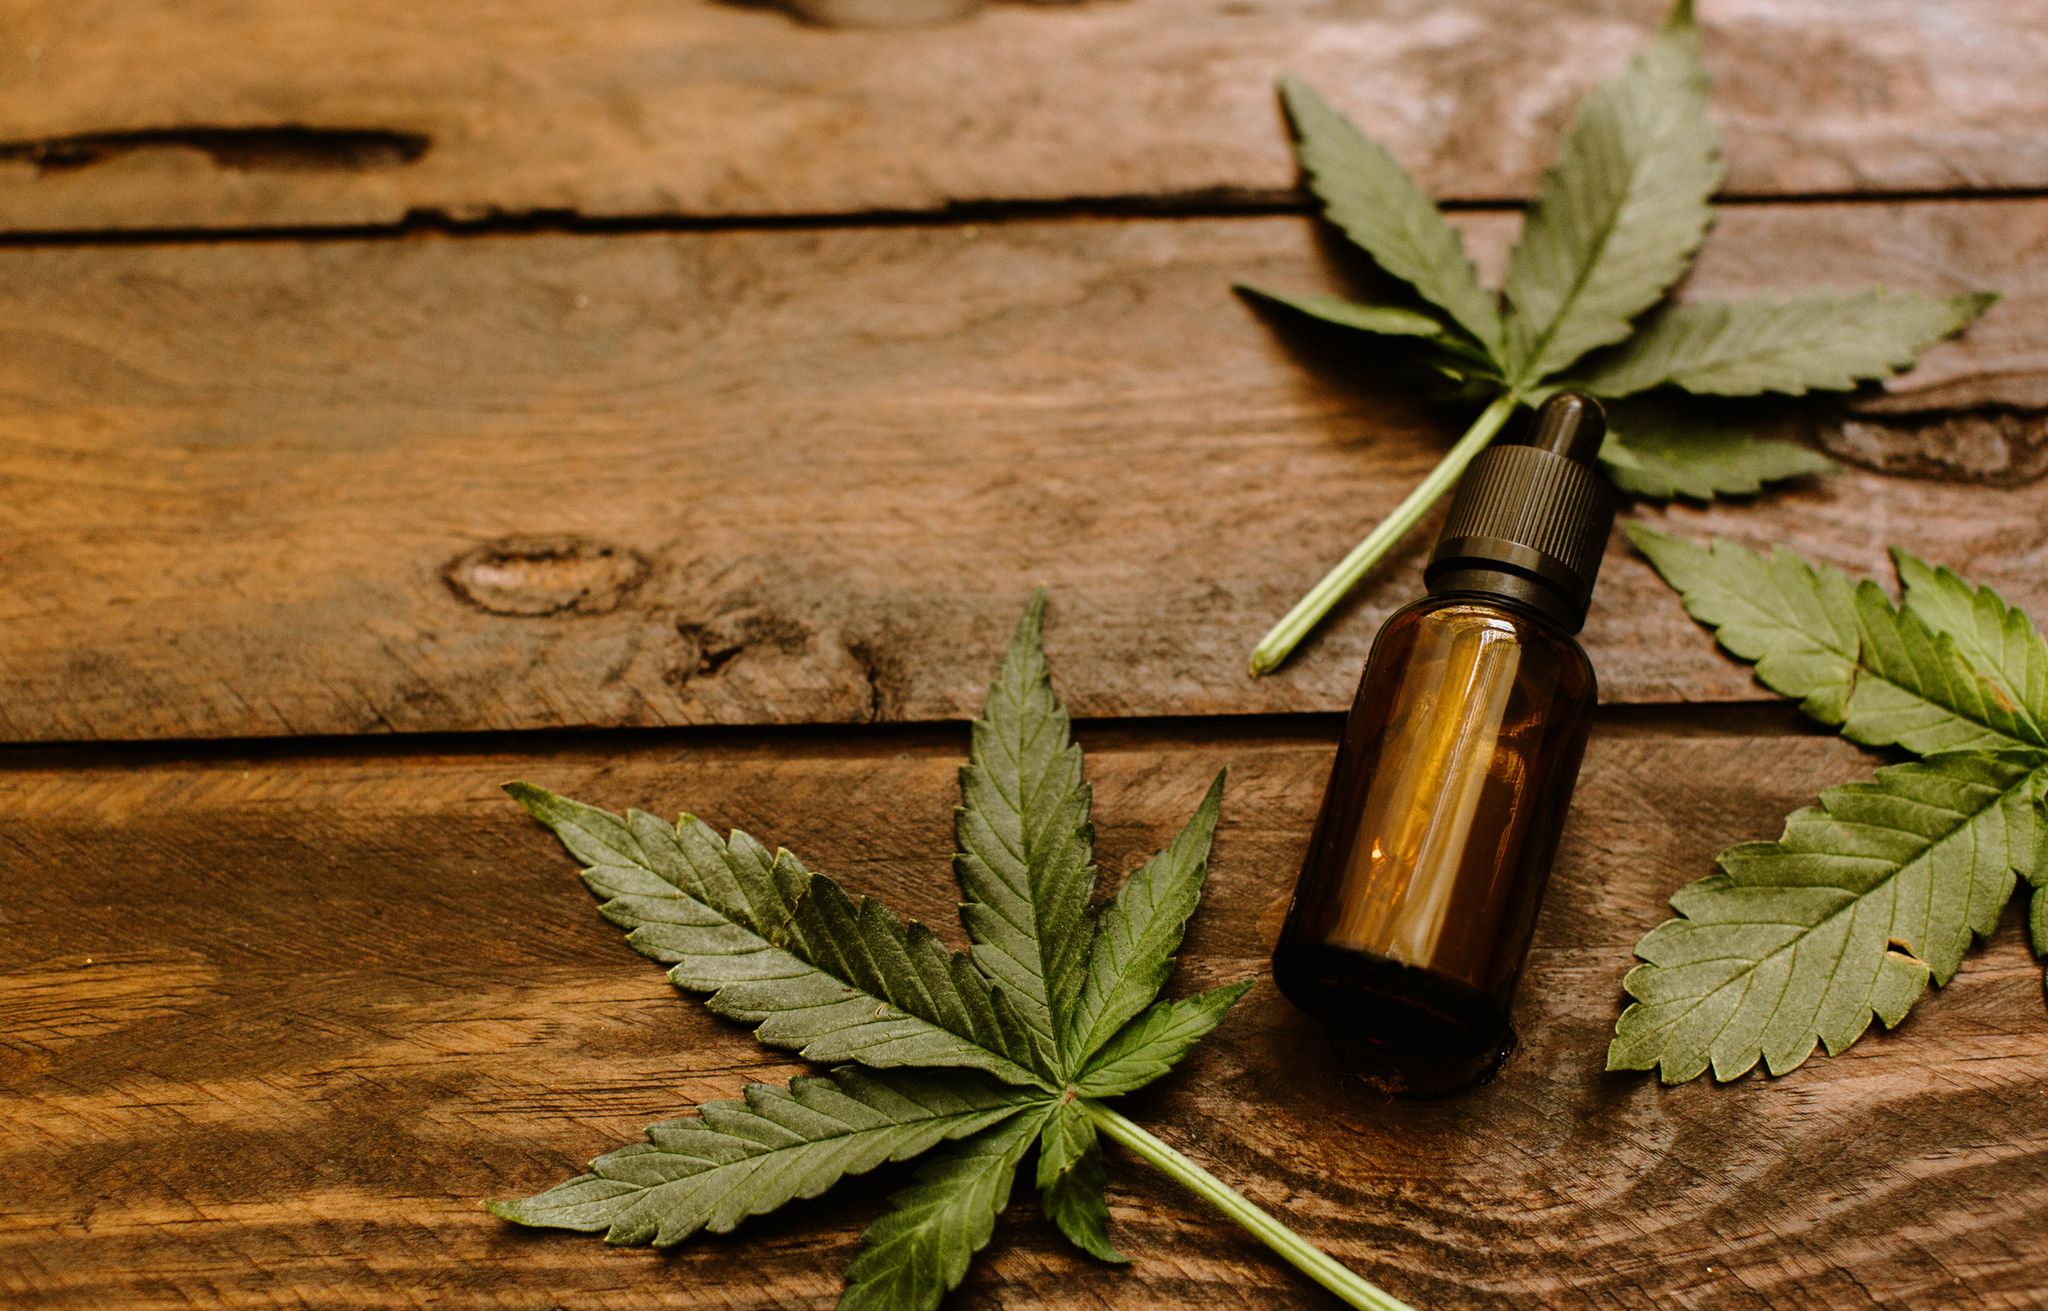 What are the main differences between using CBD Oils for Acute Pain Management Versus Chronic Pain Management?